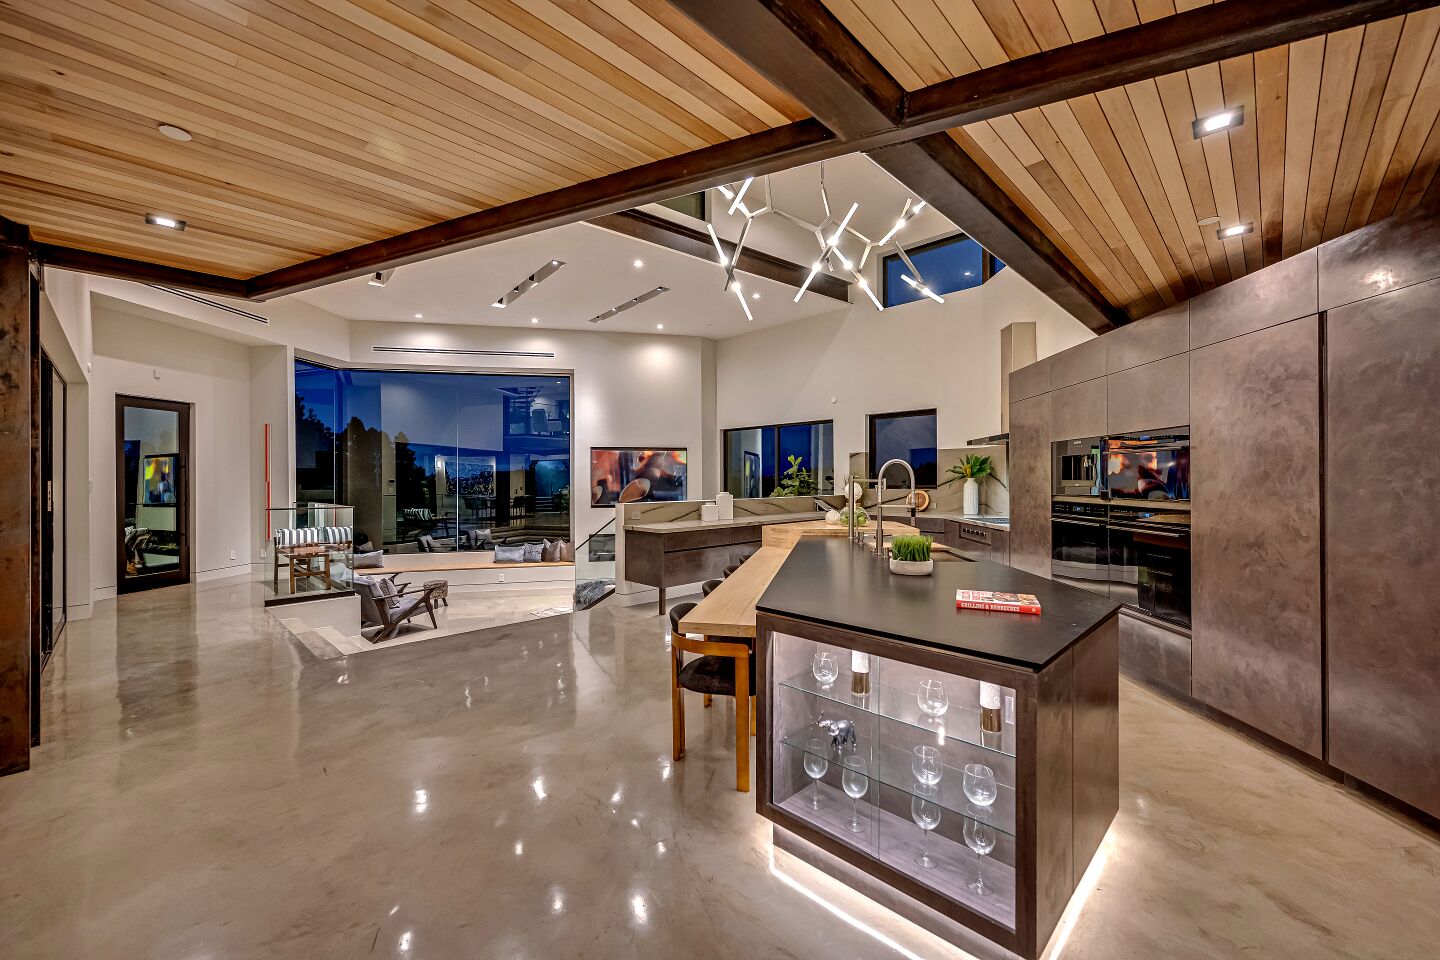 Home of the Week | A jagged, striking structure in Santa Monica